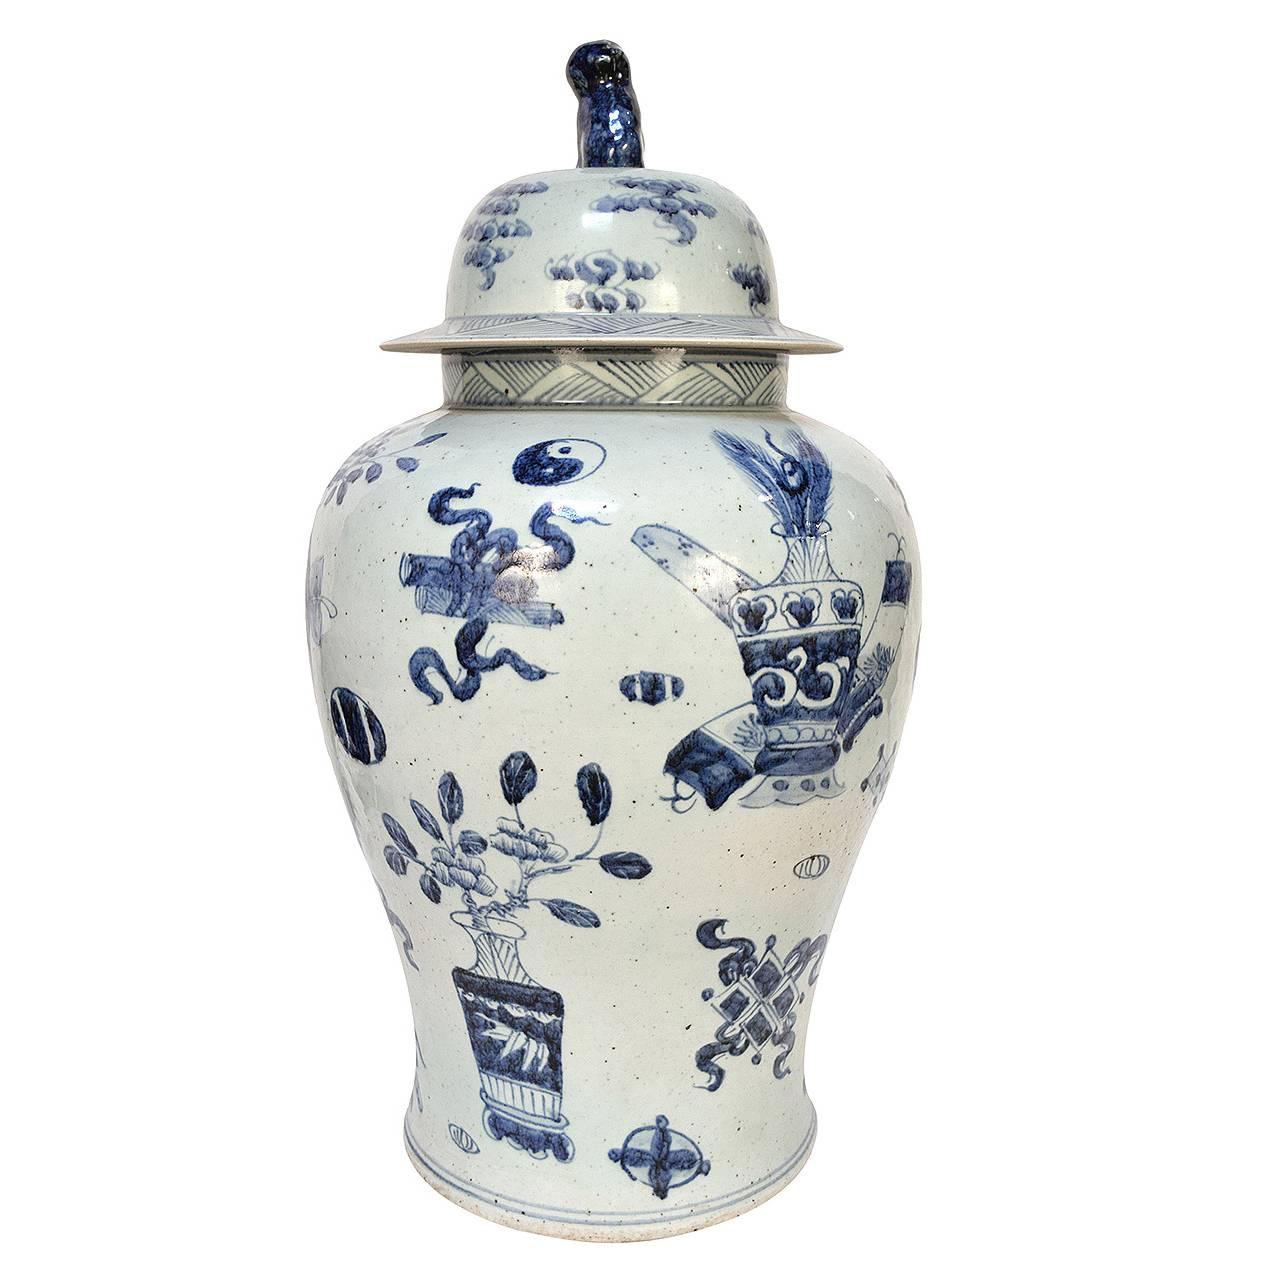 Blue and White Jar with Scholar's Objects